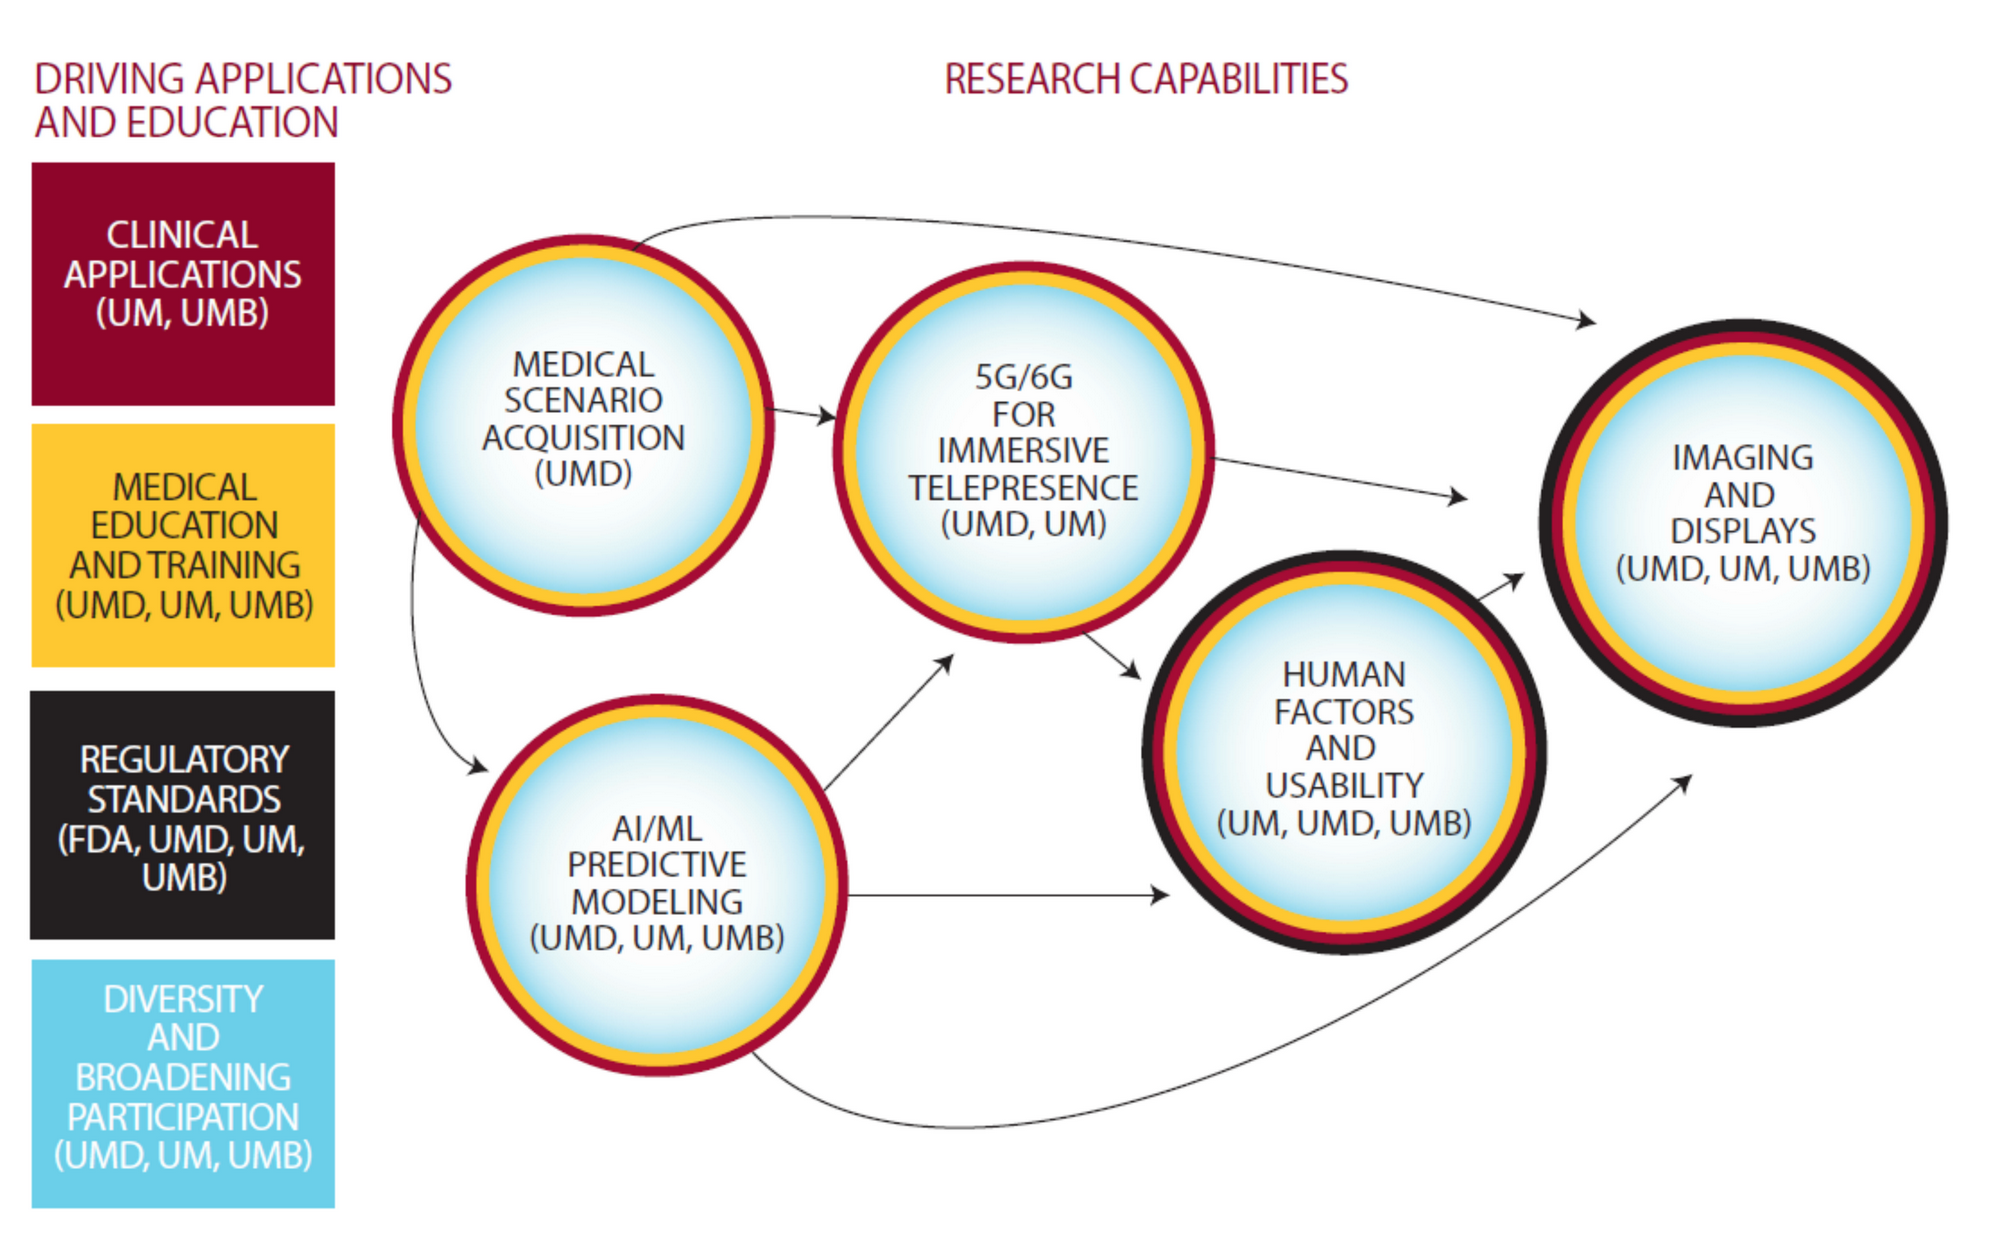 MIXR Research Capabilities